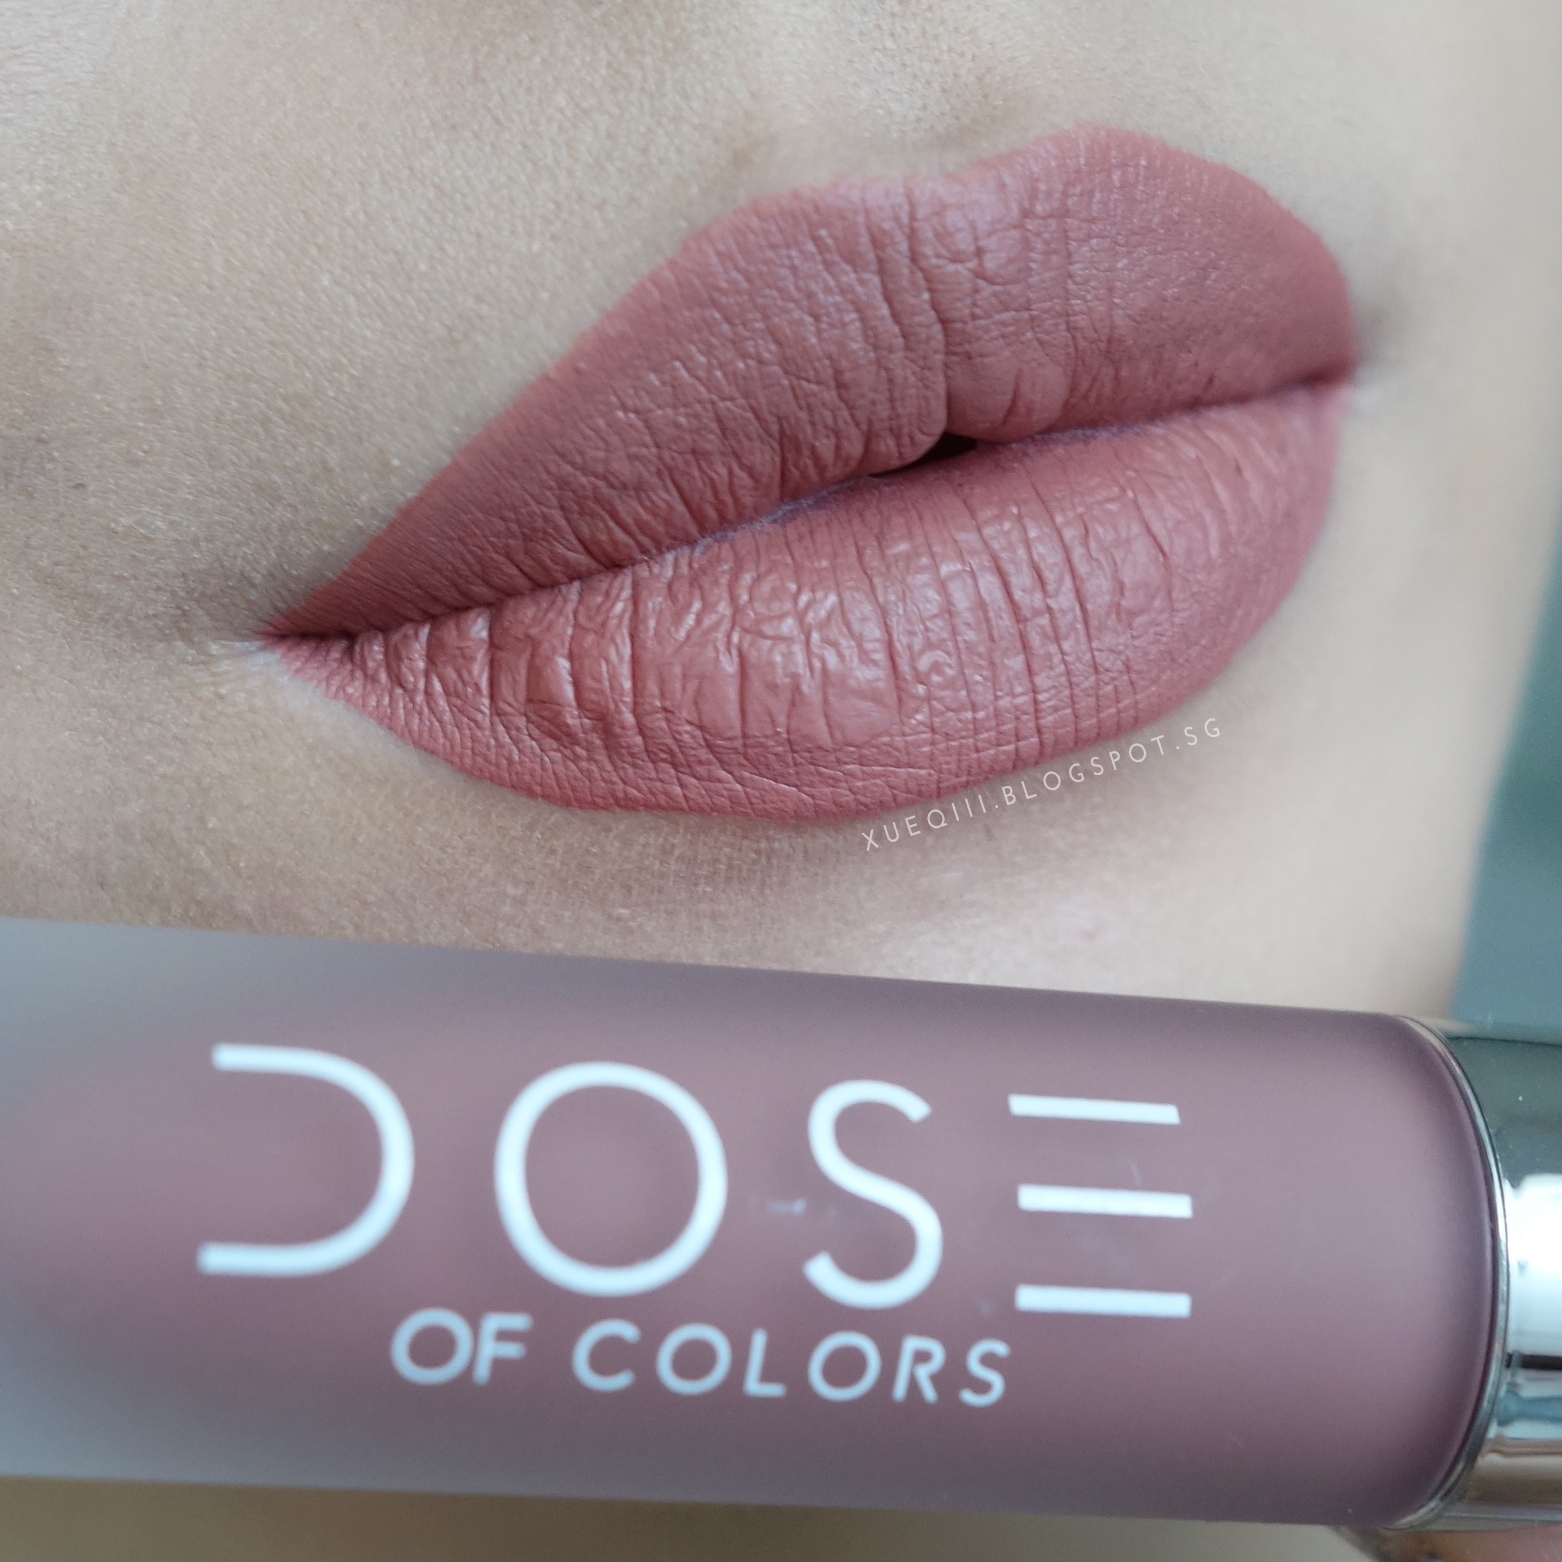 Dose Of Colors Liquid Matte Lipstick Review And Swatches Coloring Wallpapers Download Free Images Wallpaper [coloring876.blogspot.com]